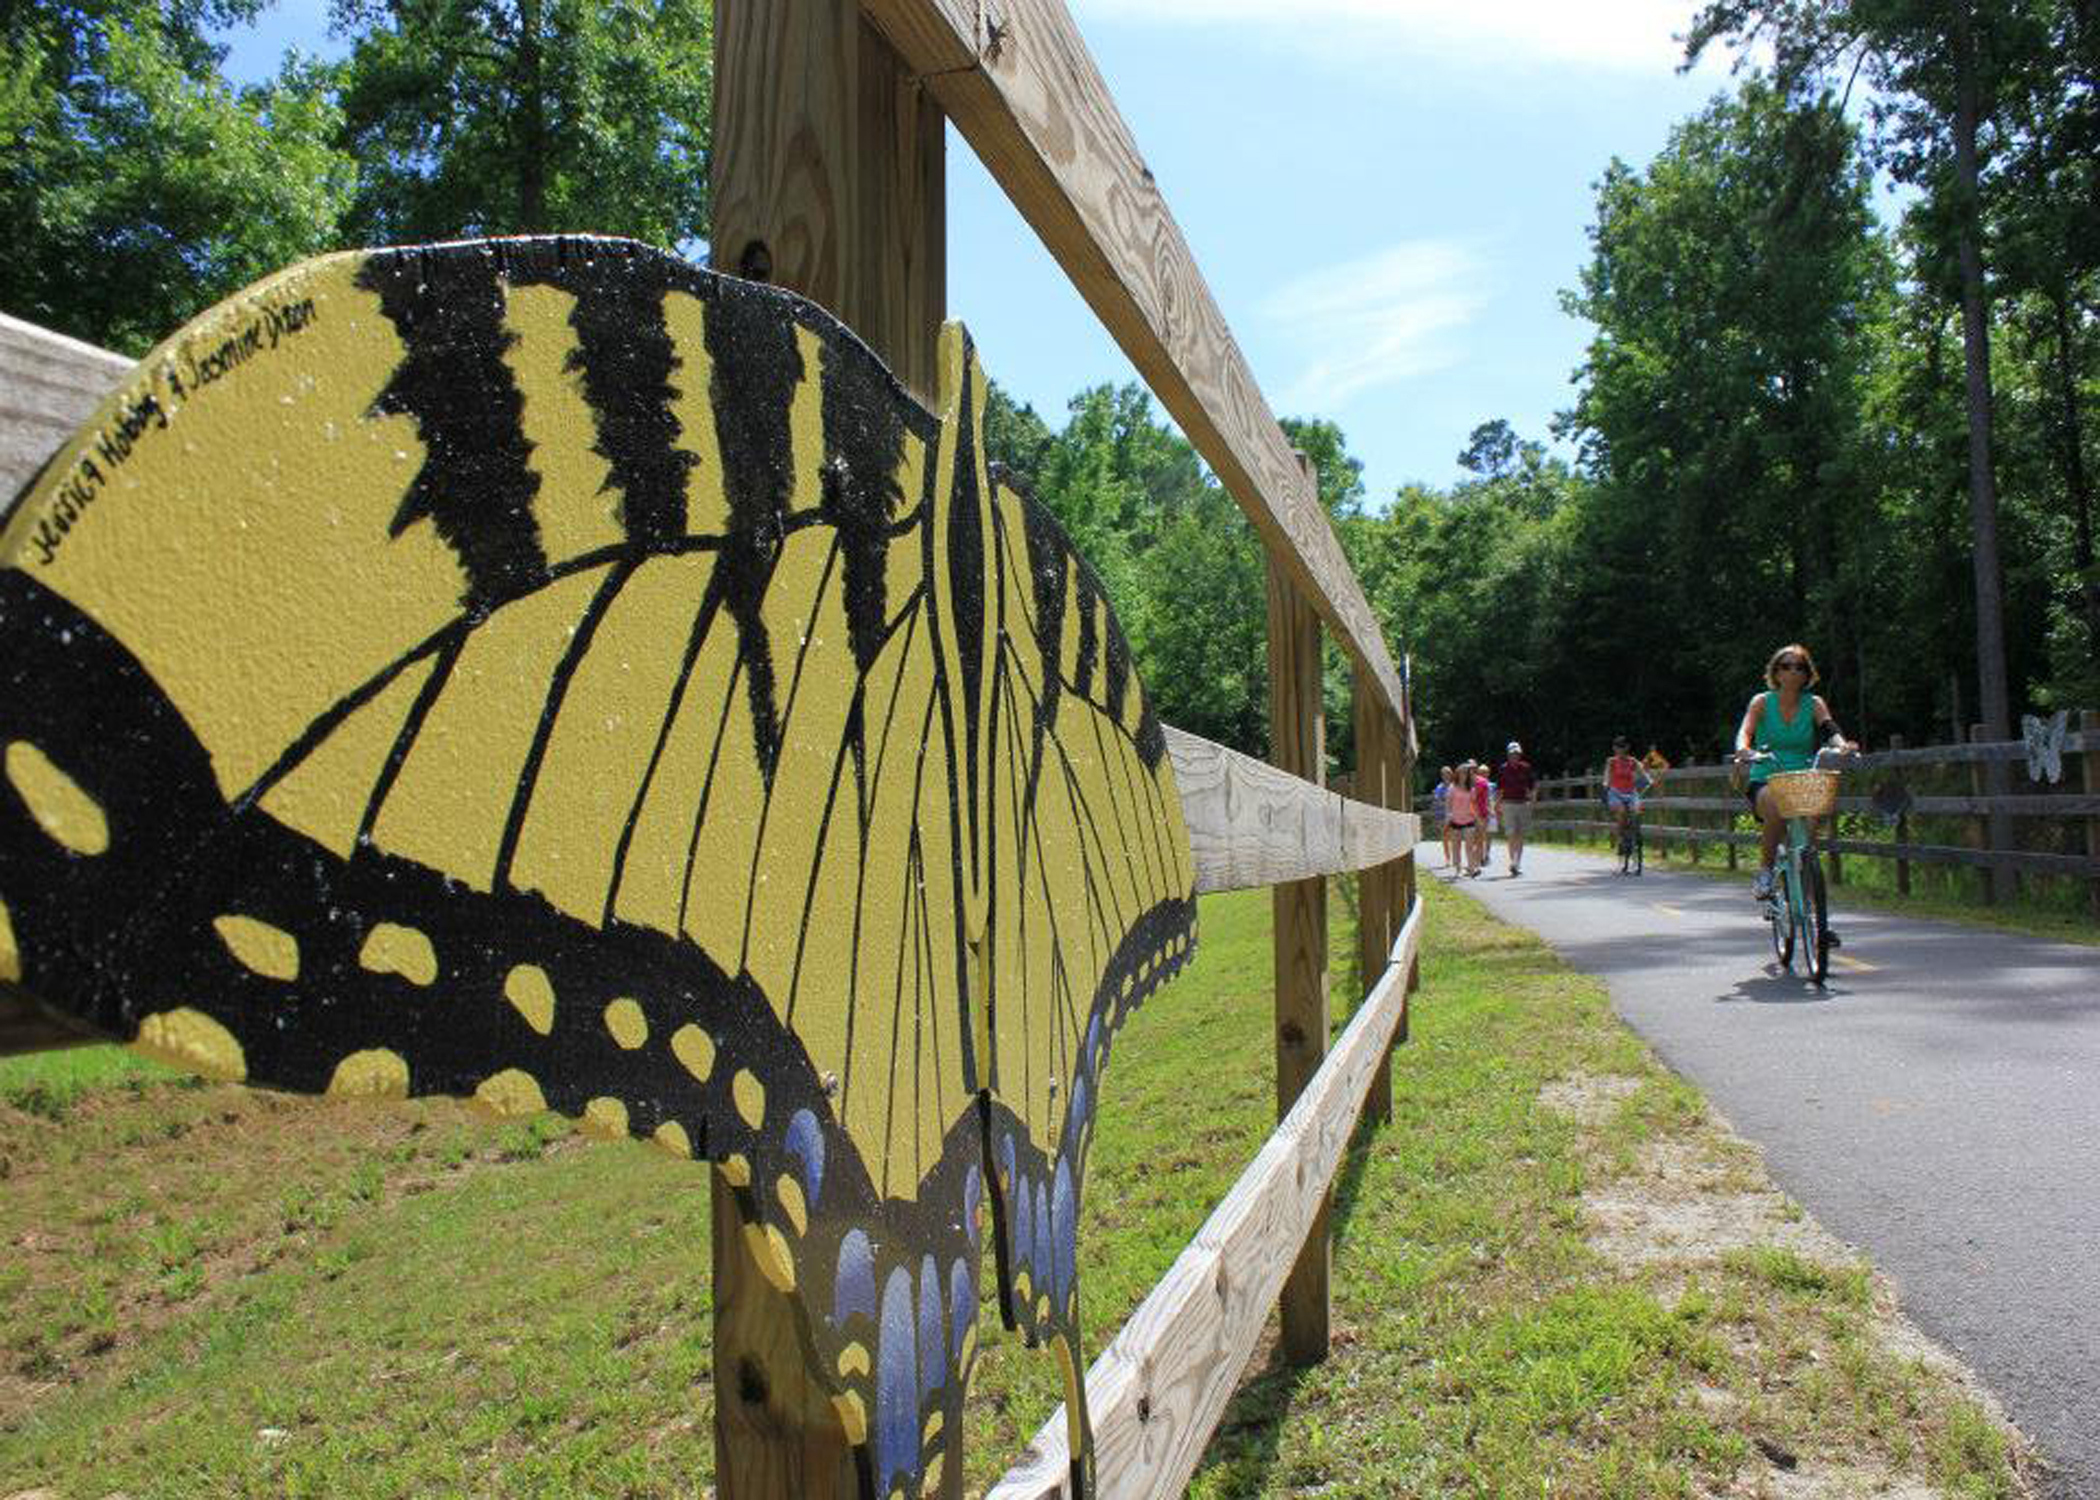 Enjoy artwork from local students along the Clayton River Walk in Clayton NC.